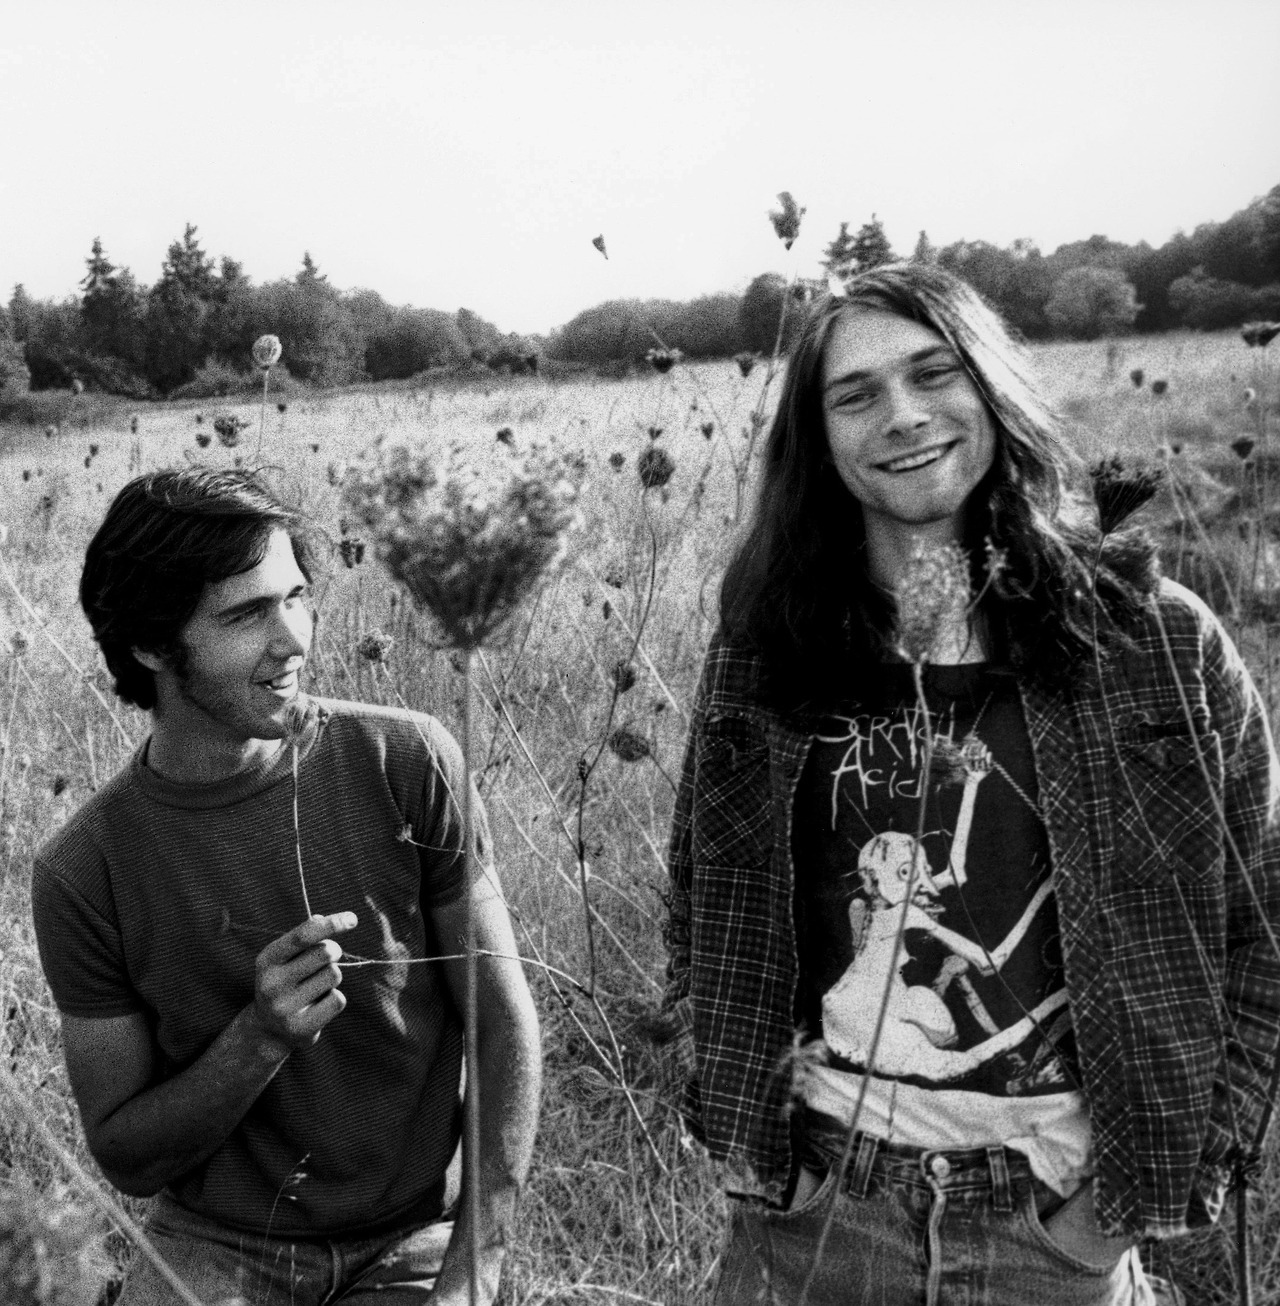 phineasforcobain:  Krist (with weed mike)  so tell me mr. cobain, what’s your